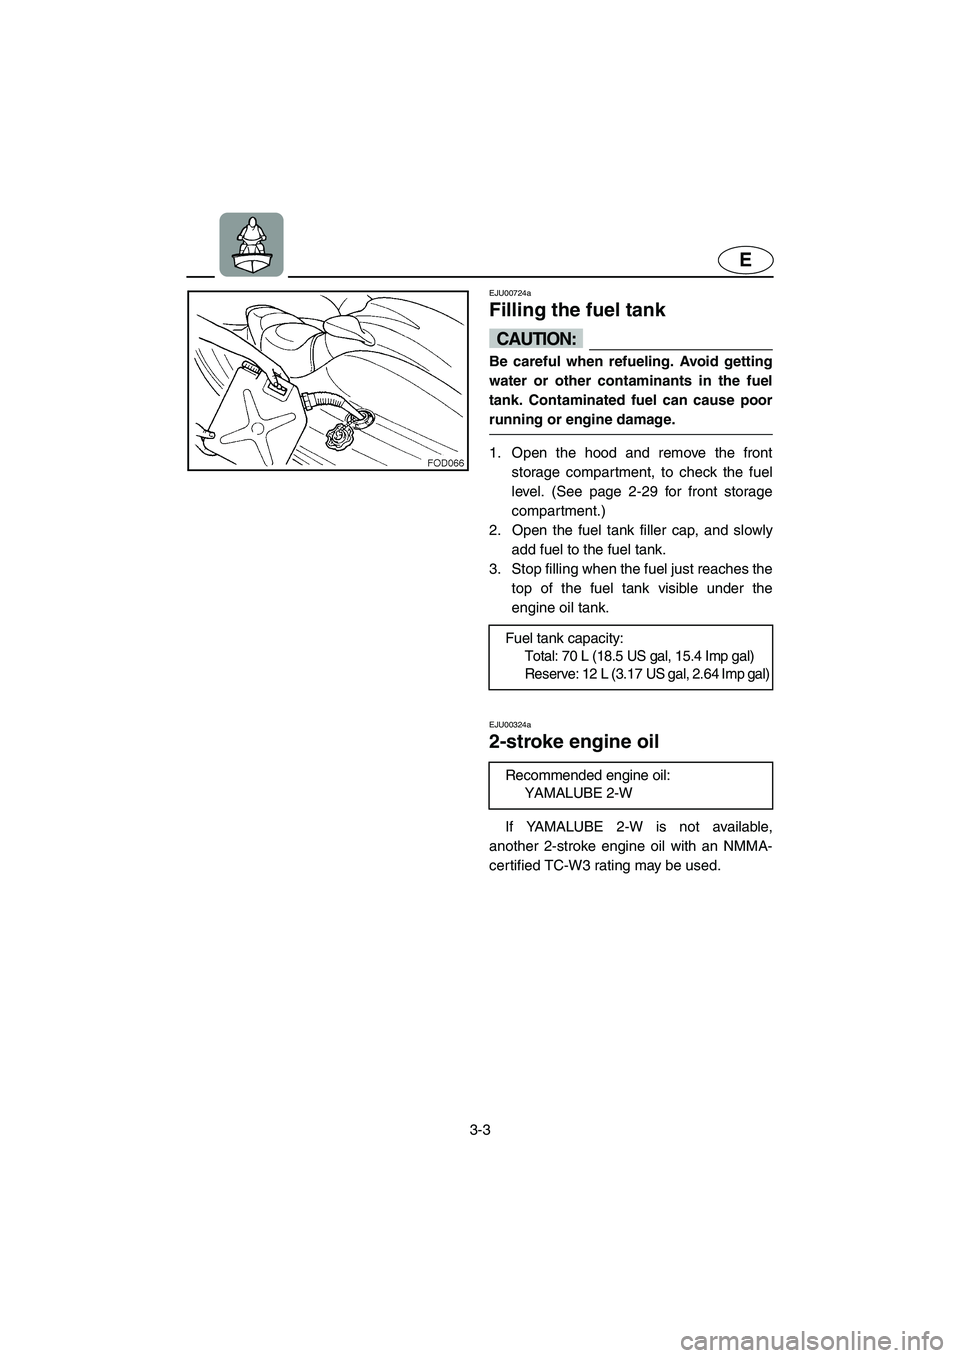 YAMAHA XL 800 2001  Owners Manual 3-3
E
EJU00724a
Filling the fuel tank
CAUTION:
Be careful when refueling. Avoid getting
water or other contaminants in the fuel
tank. Contaminated fuel can cause poor
running or engine damage.
1. Open